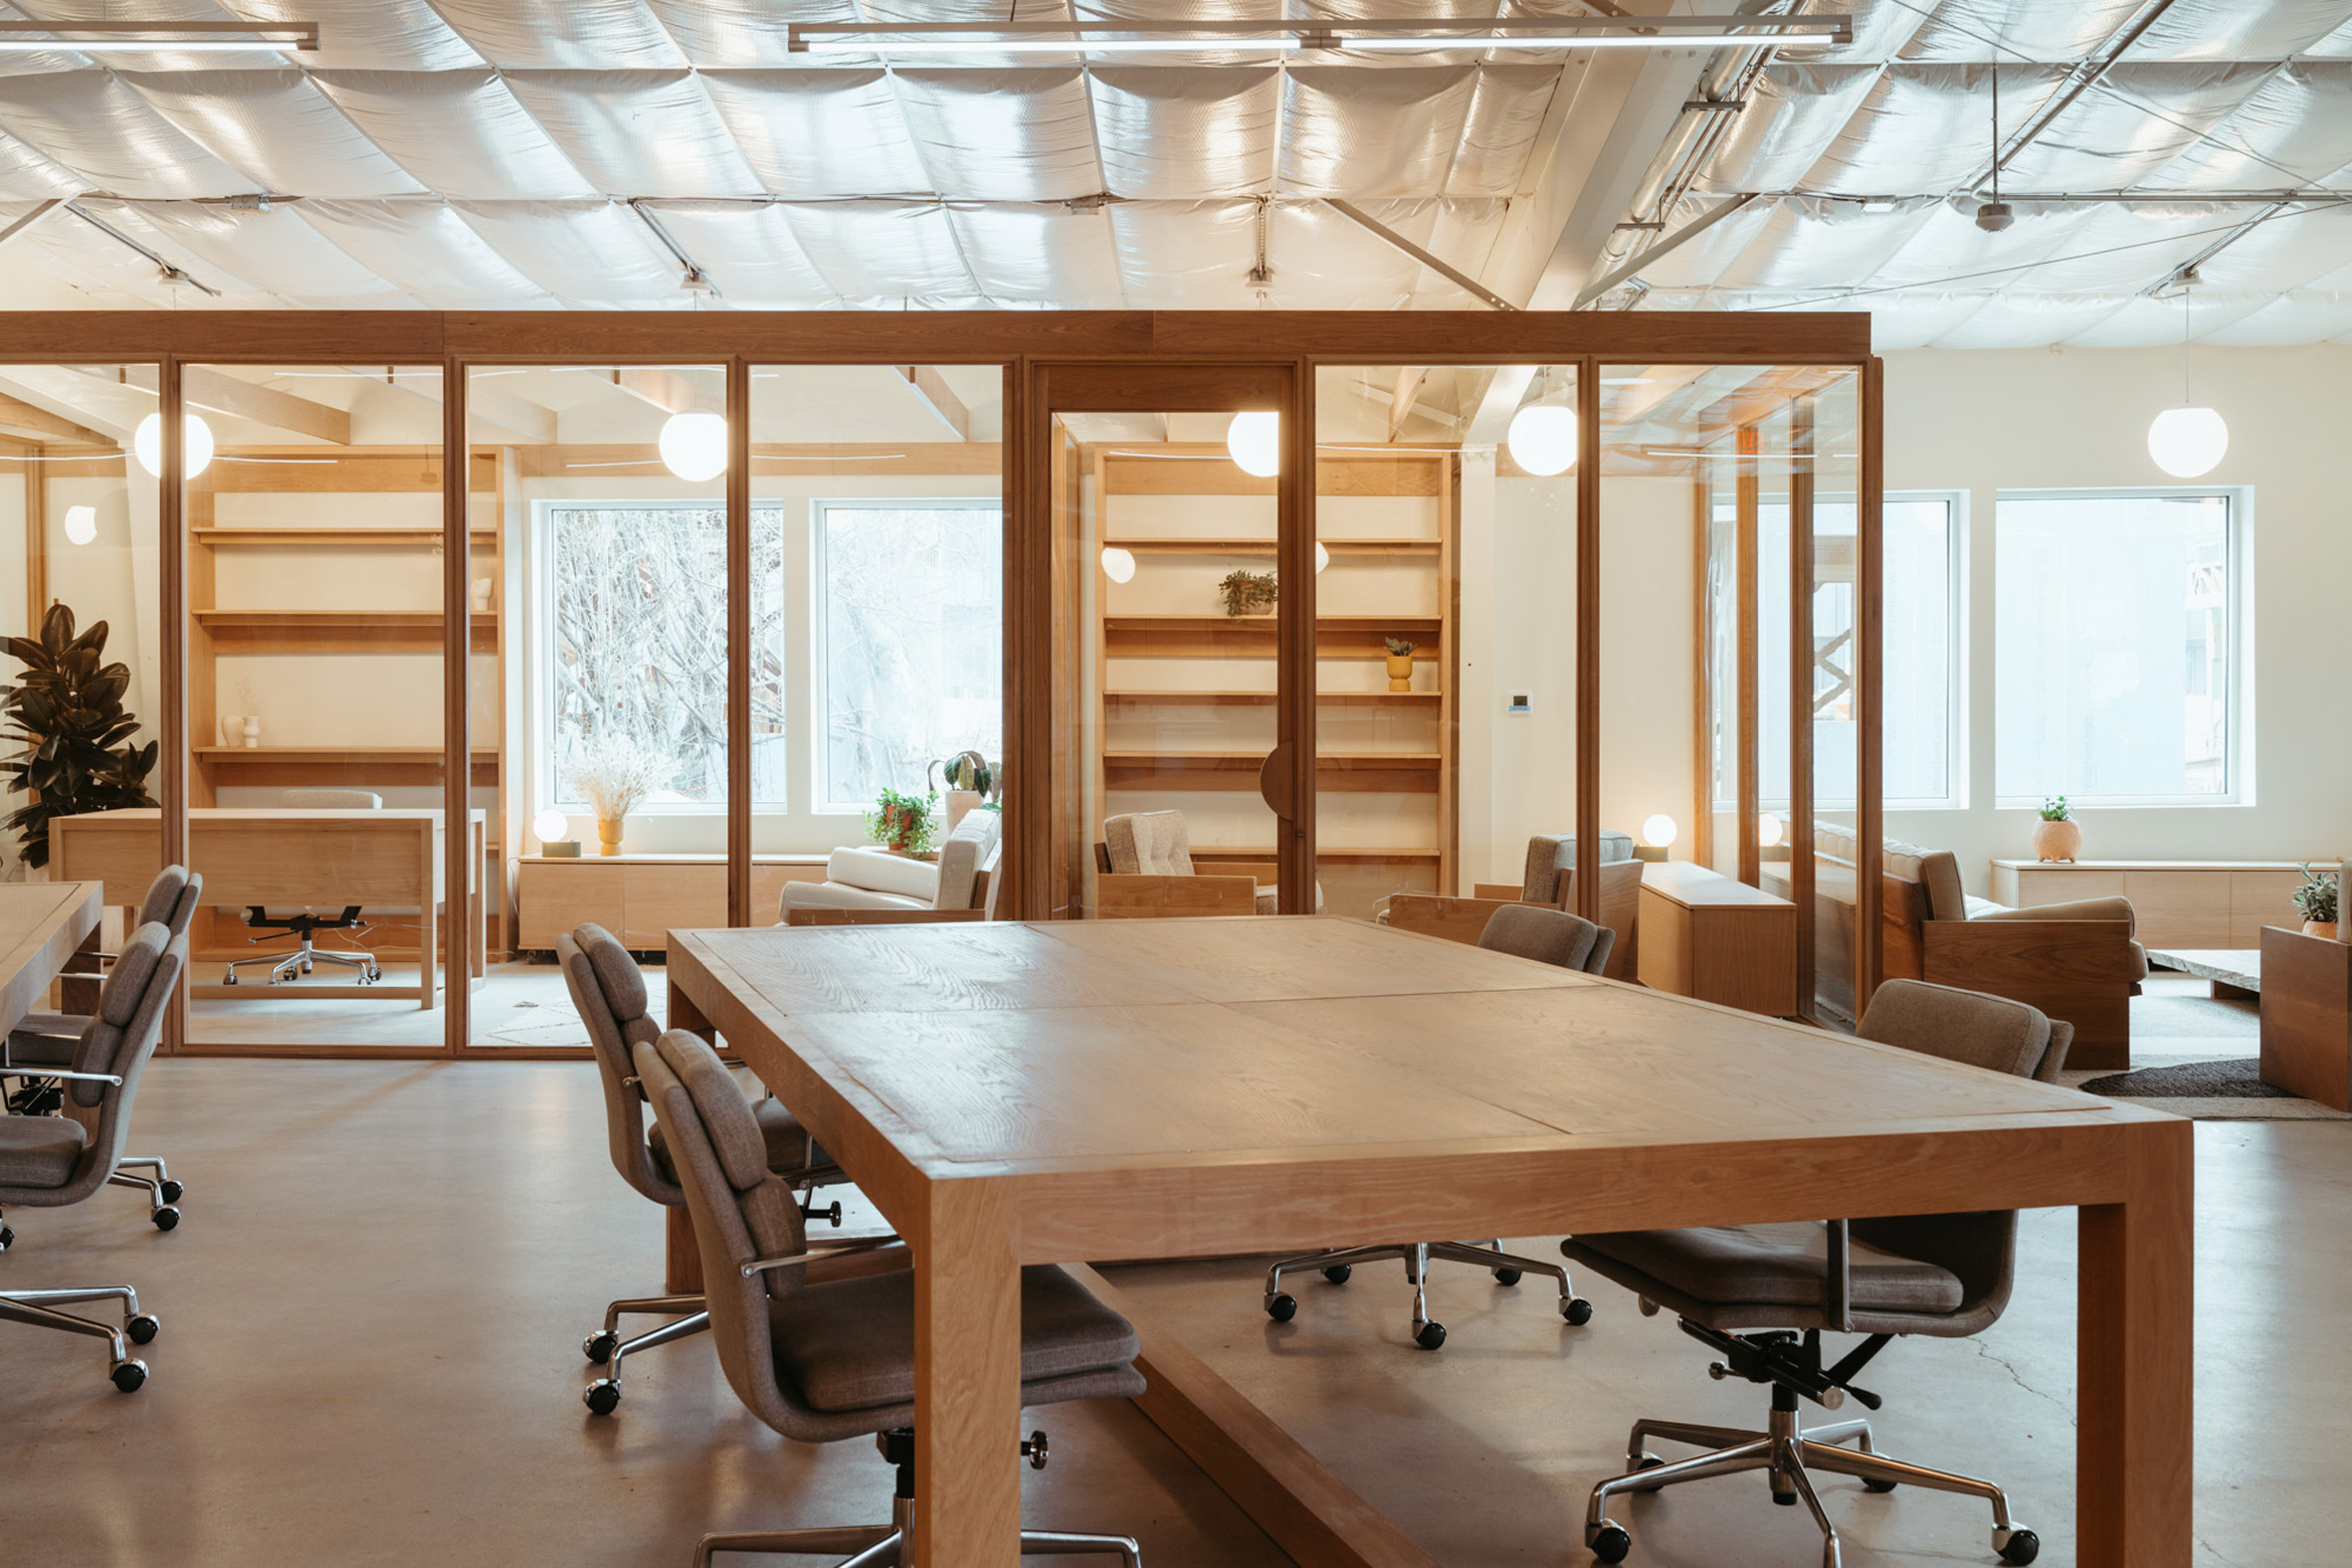 Open workspace featuring large wood tables